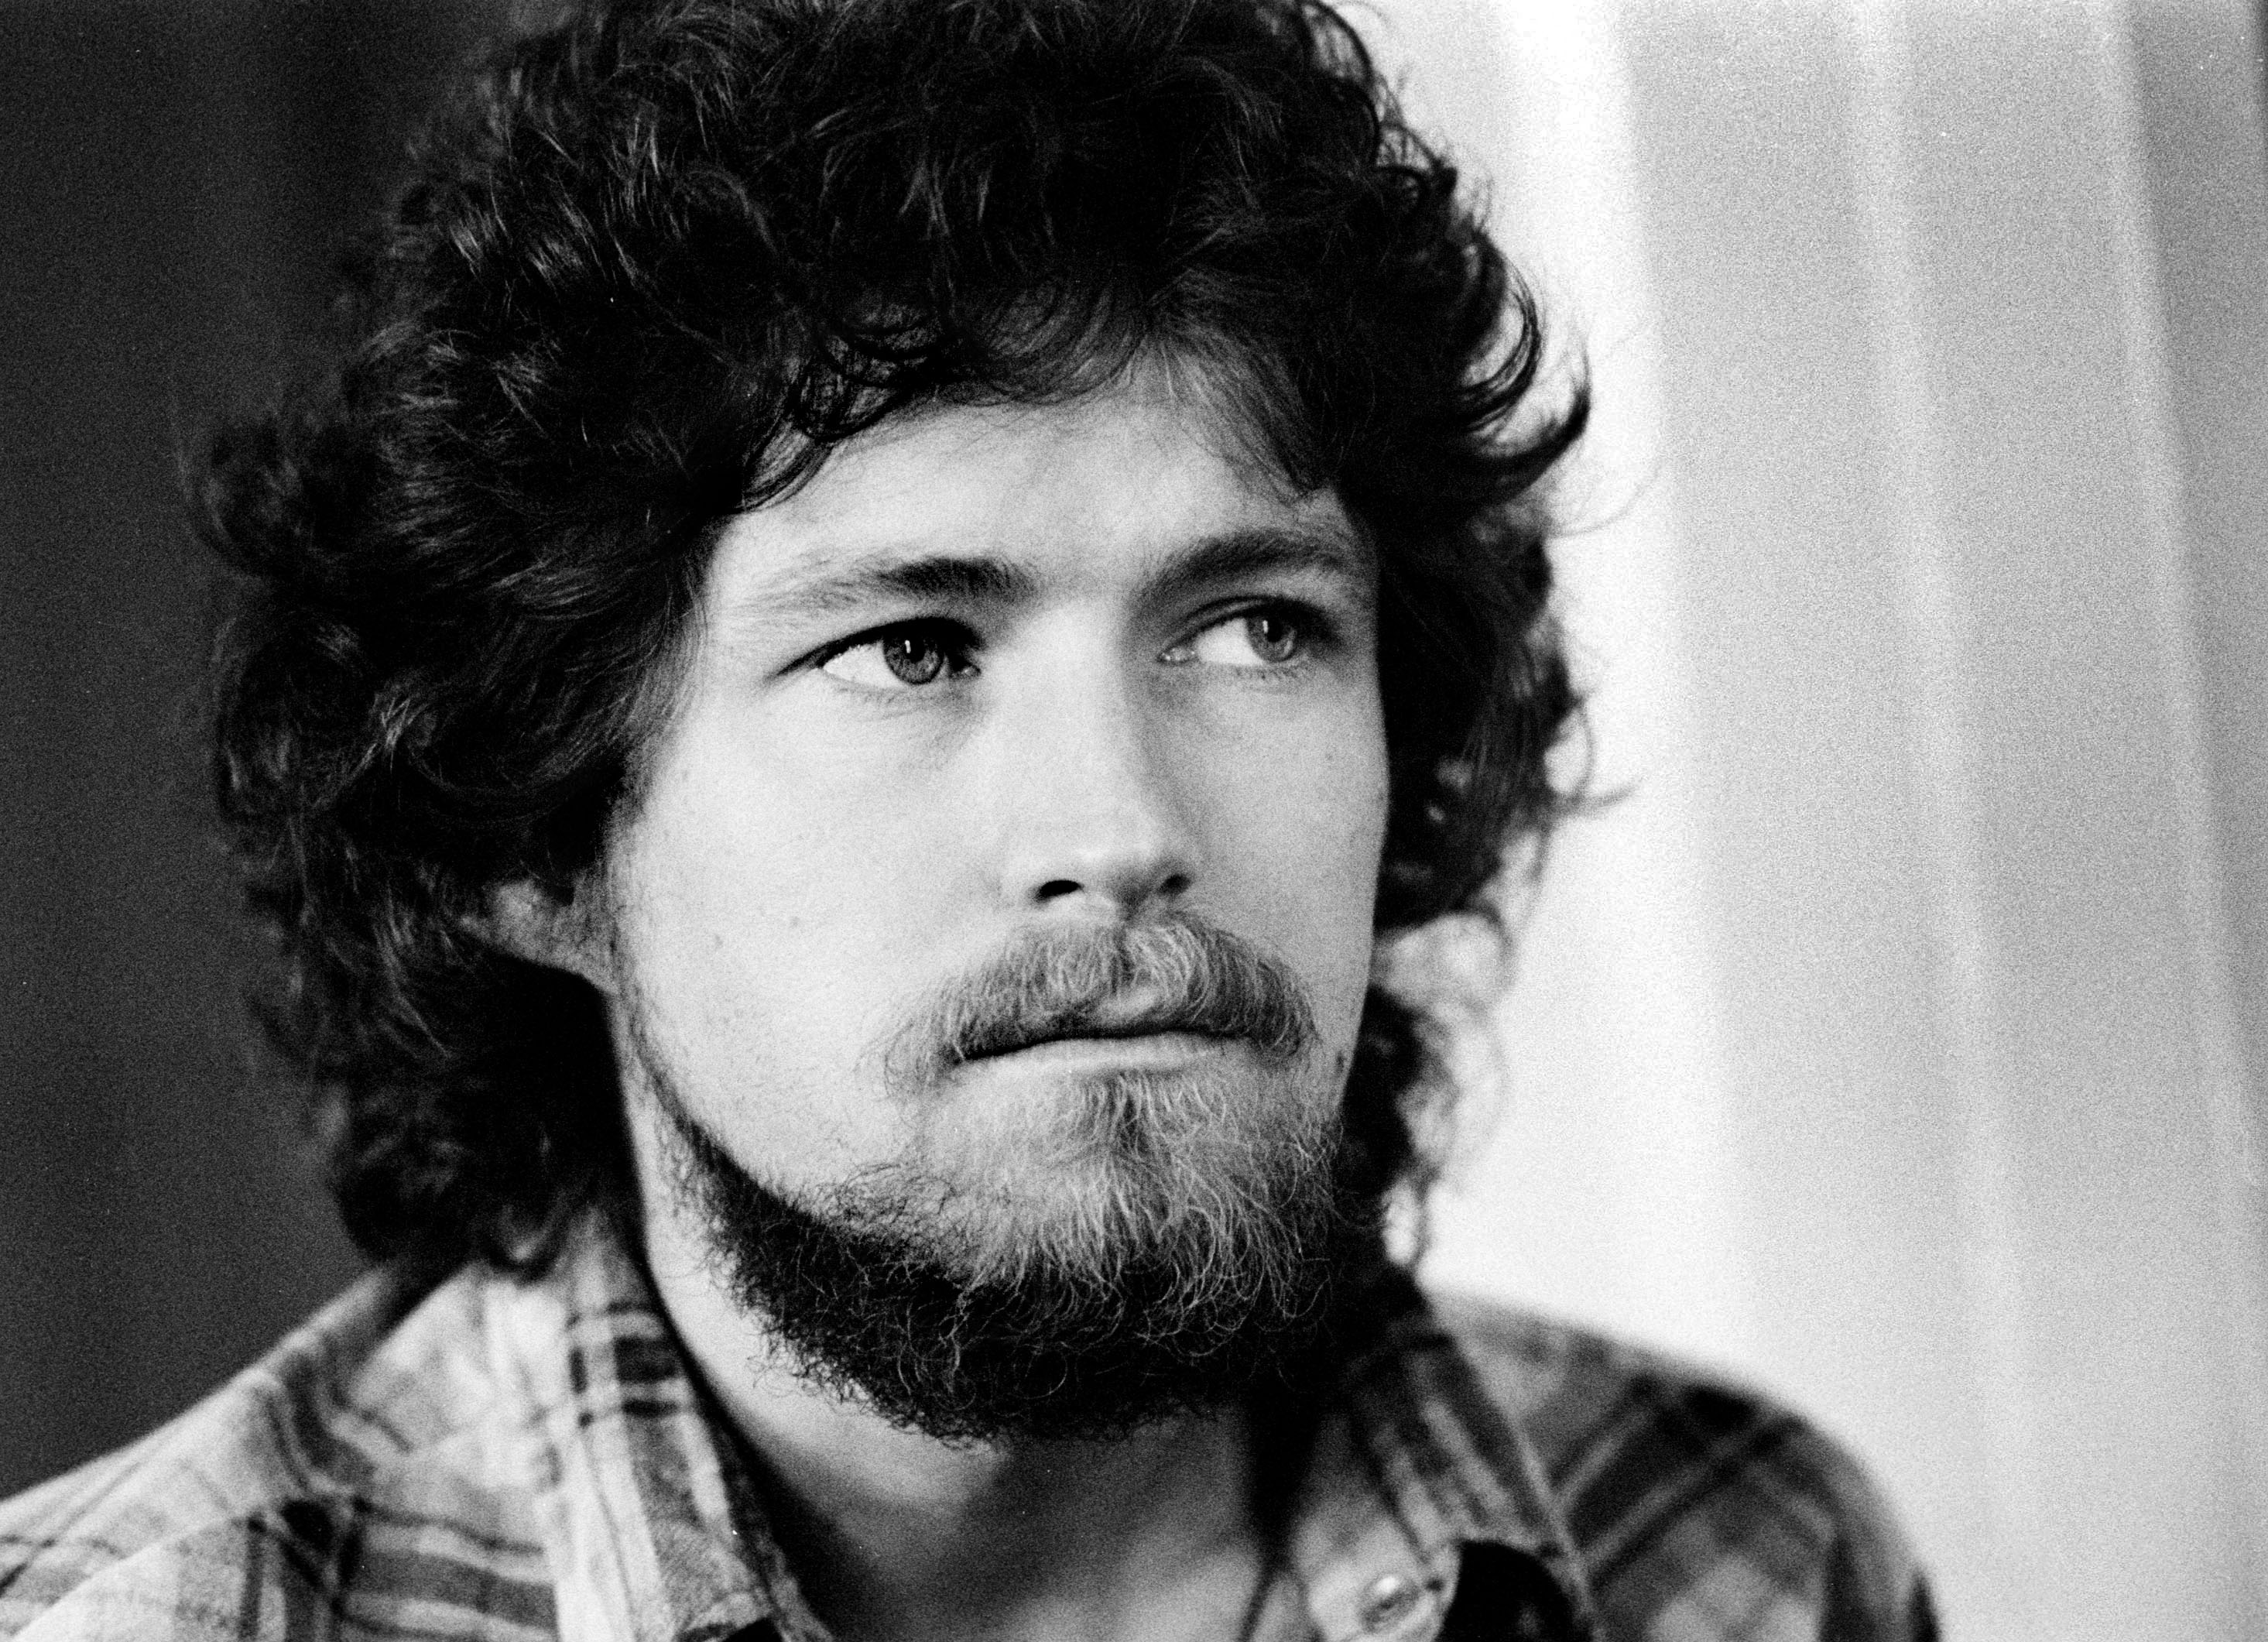 Don Henley’s ‘The Boys of Summer’ Is a Statement About ‘the Woodstock Generation’